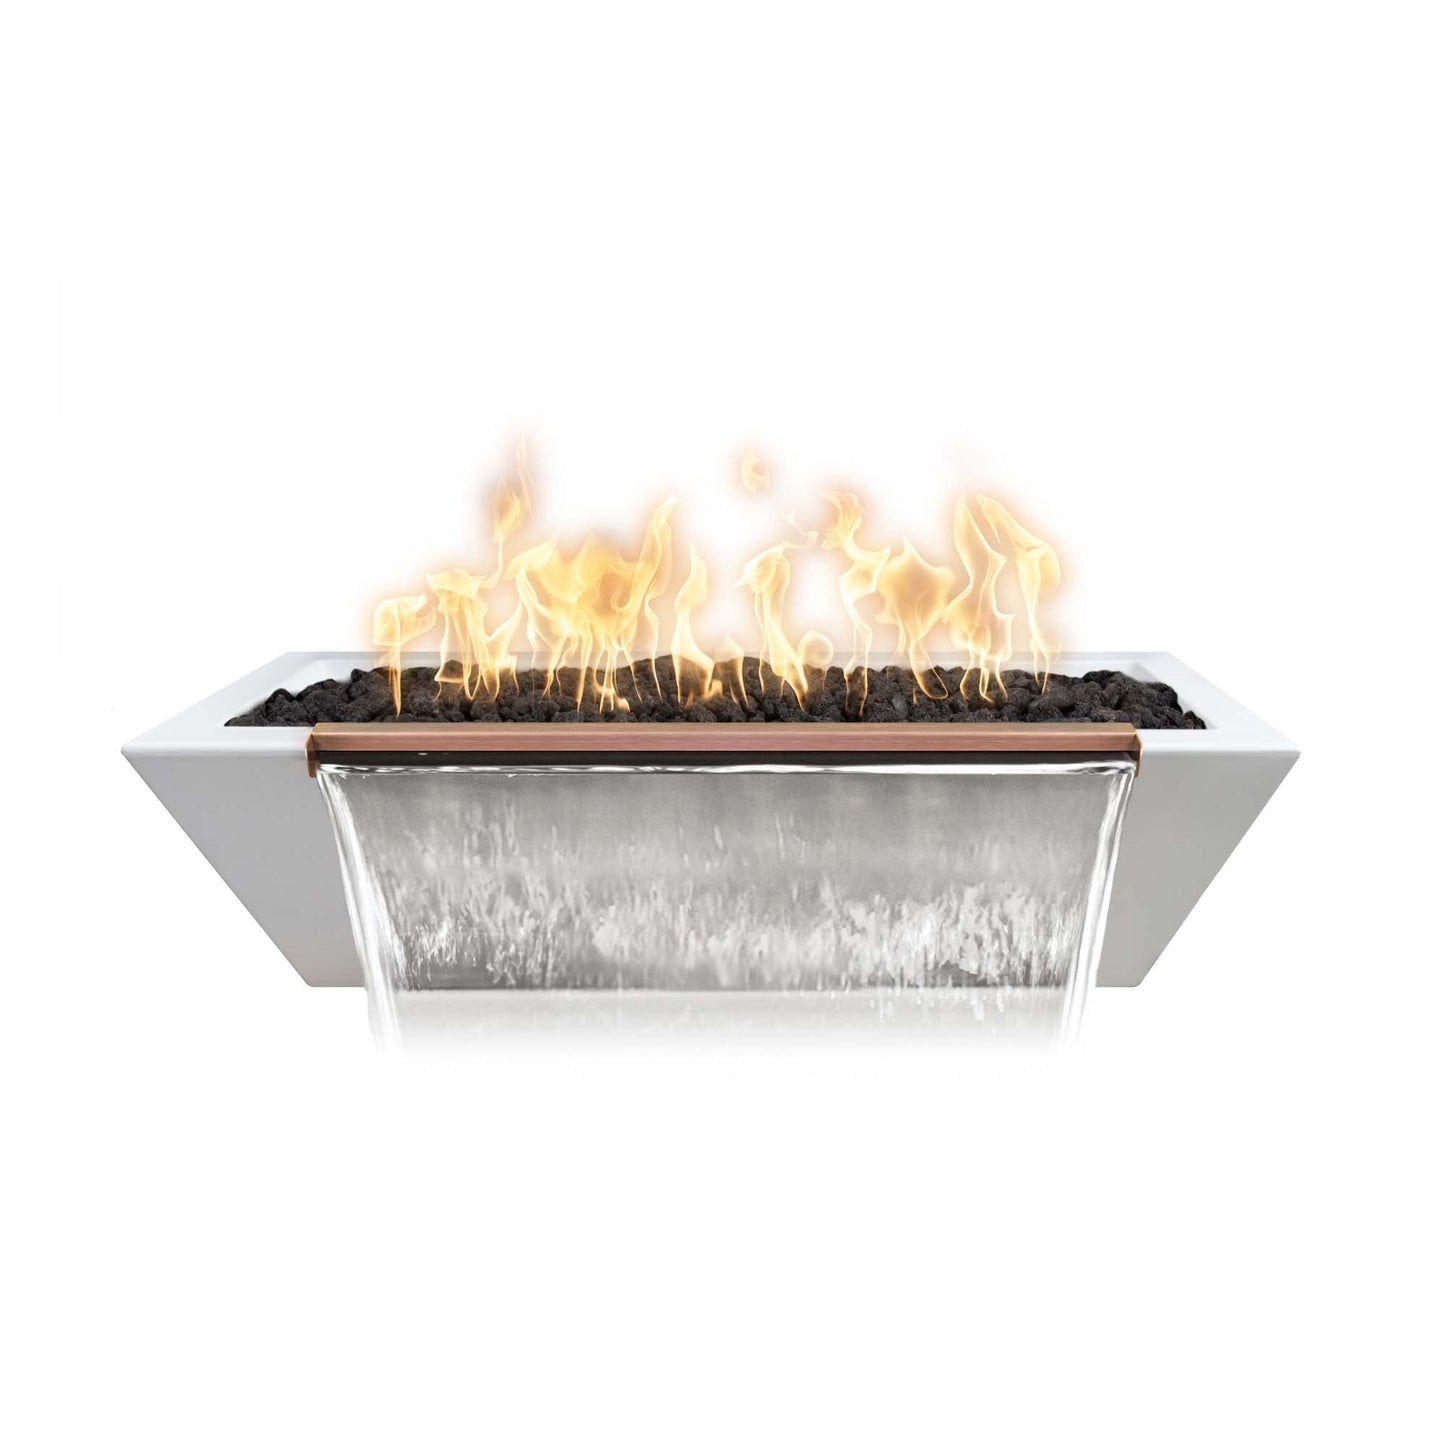 The Outdoor Plus Linear Maya 60" Rustic Moss Stone GFRC Concrete Liquid Propane Fire & Water Bowl with Match Lit Ignition